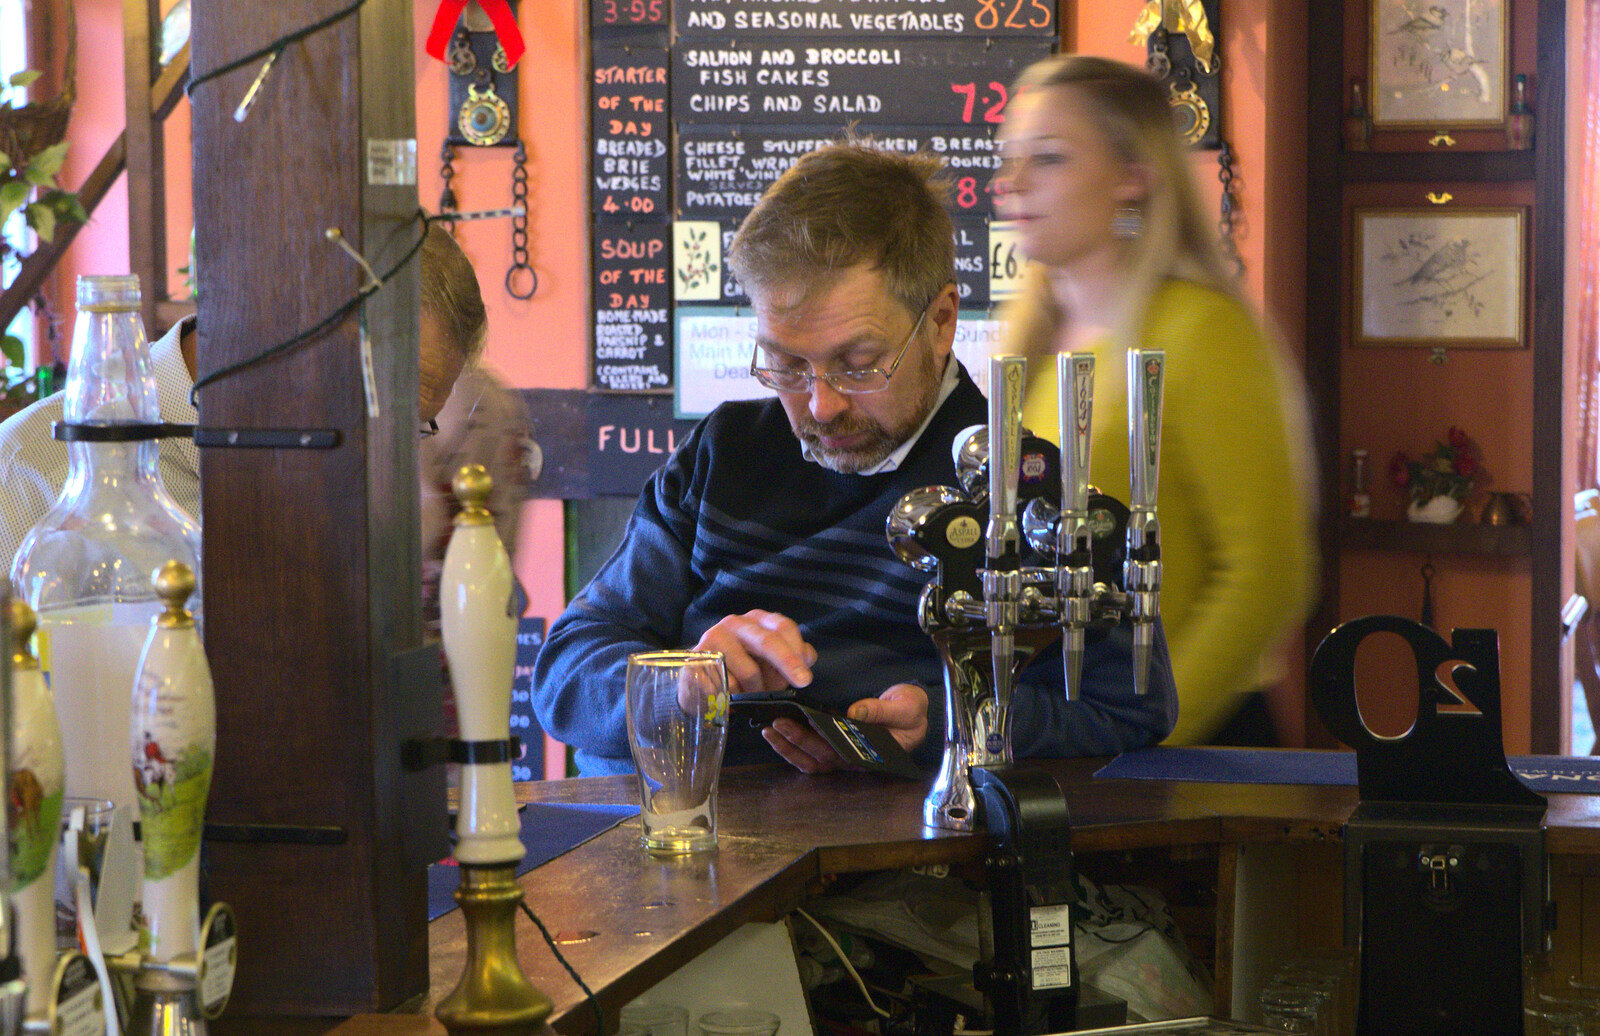 Marc pokes around on his phone from Christmas Day at the Swan Inn, Brome, Suffolk - 25th December 2014